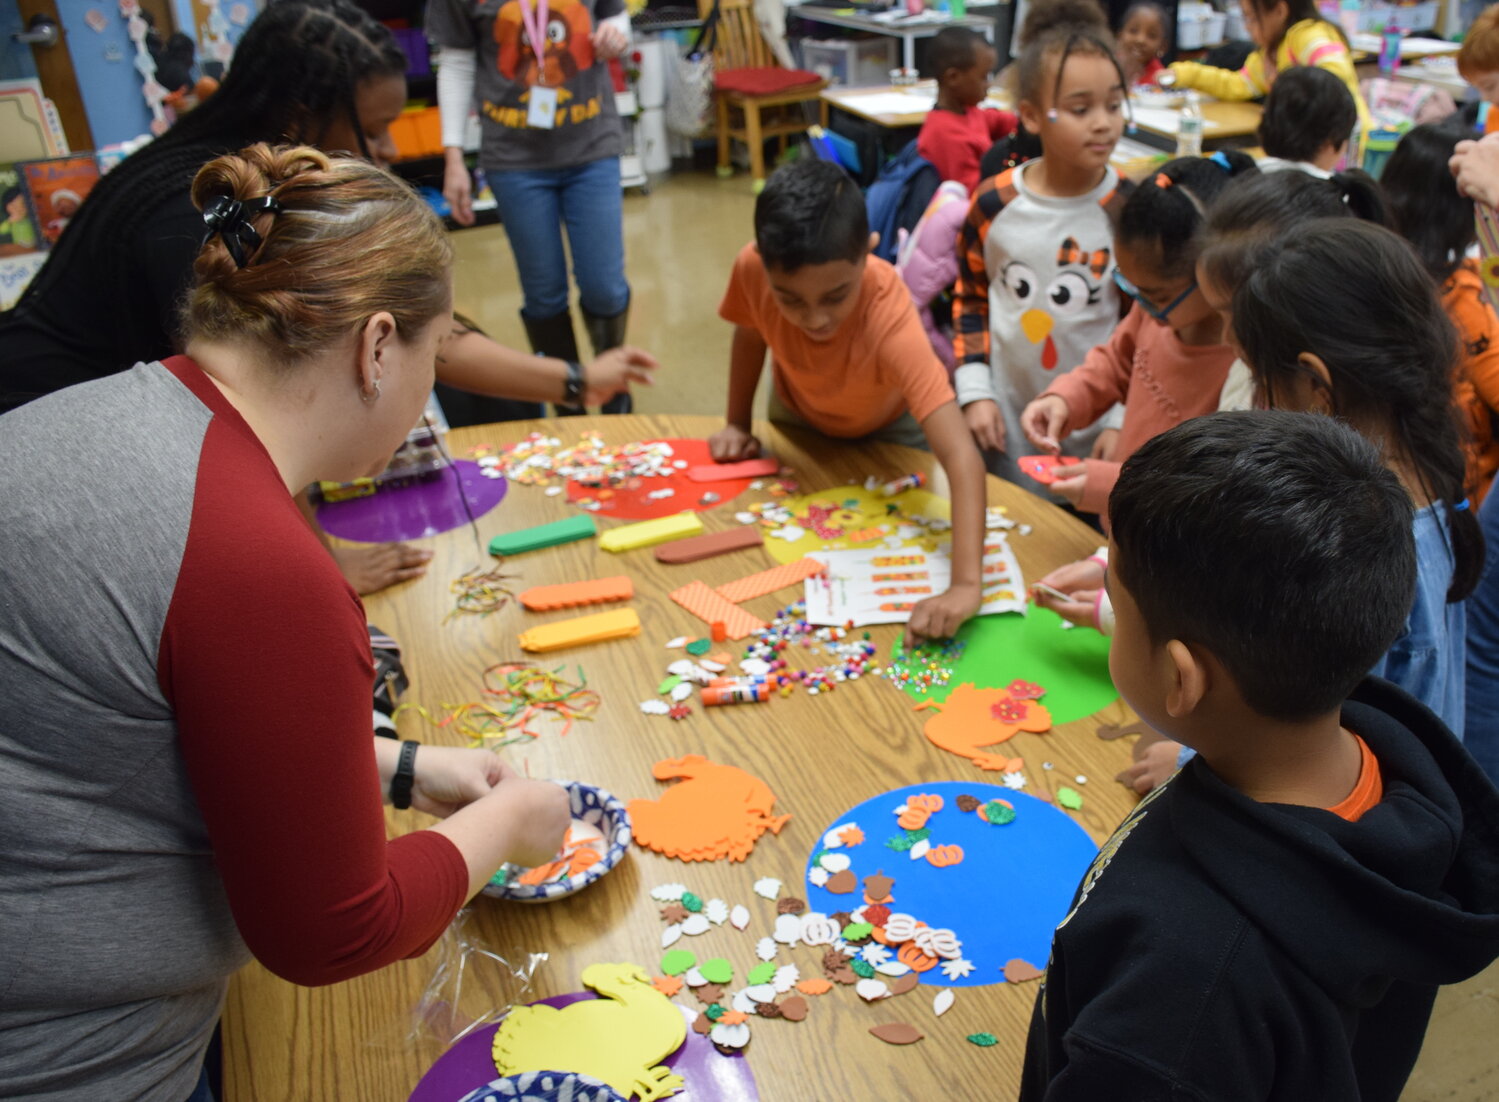 The elementary school students used beads, stickers and more to create festive crafts in celebration of the holiday. Each student’s creativity shone through in their projects.